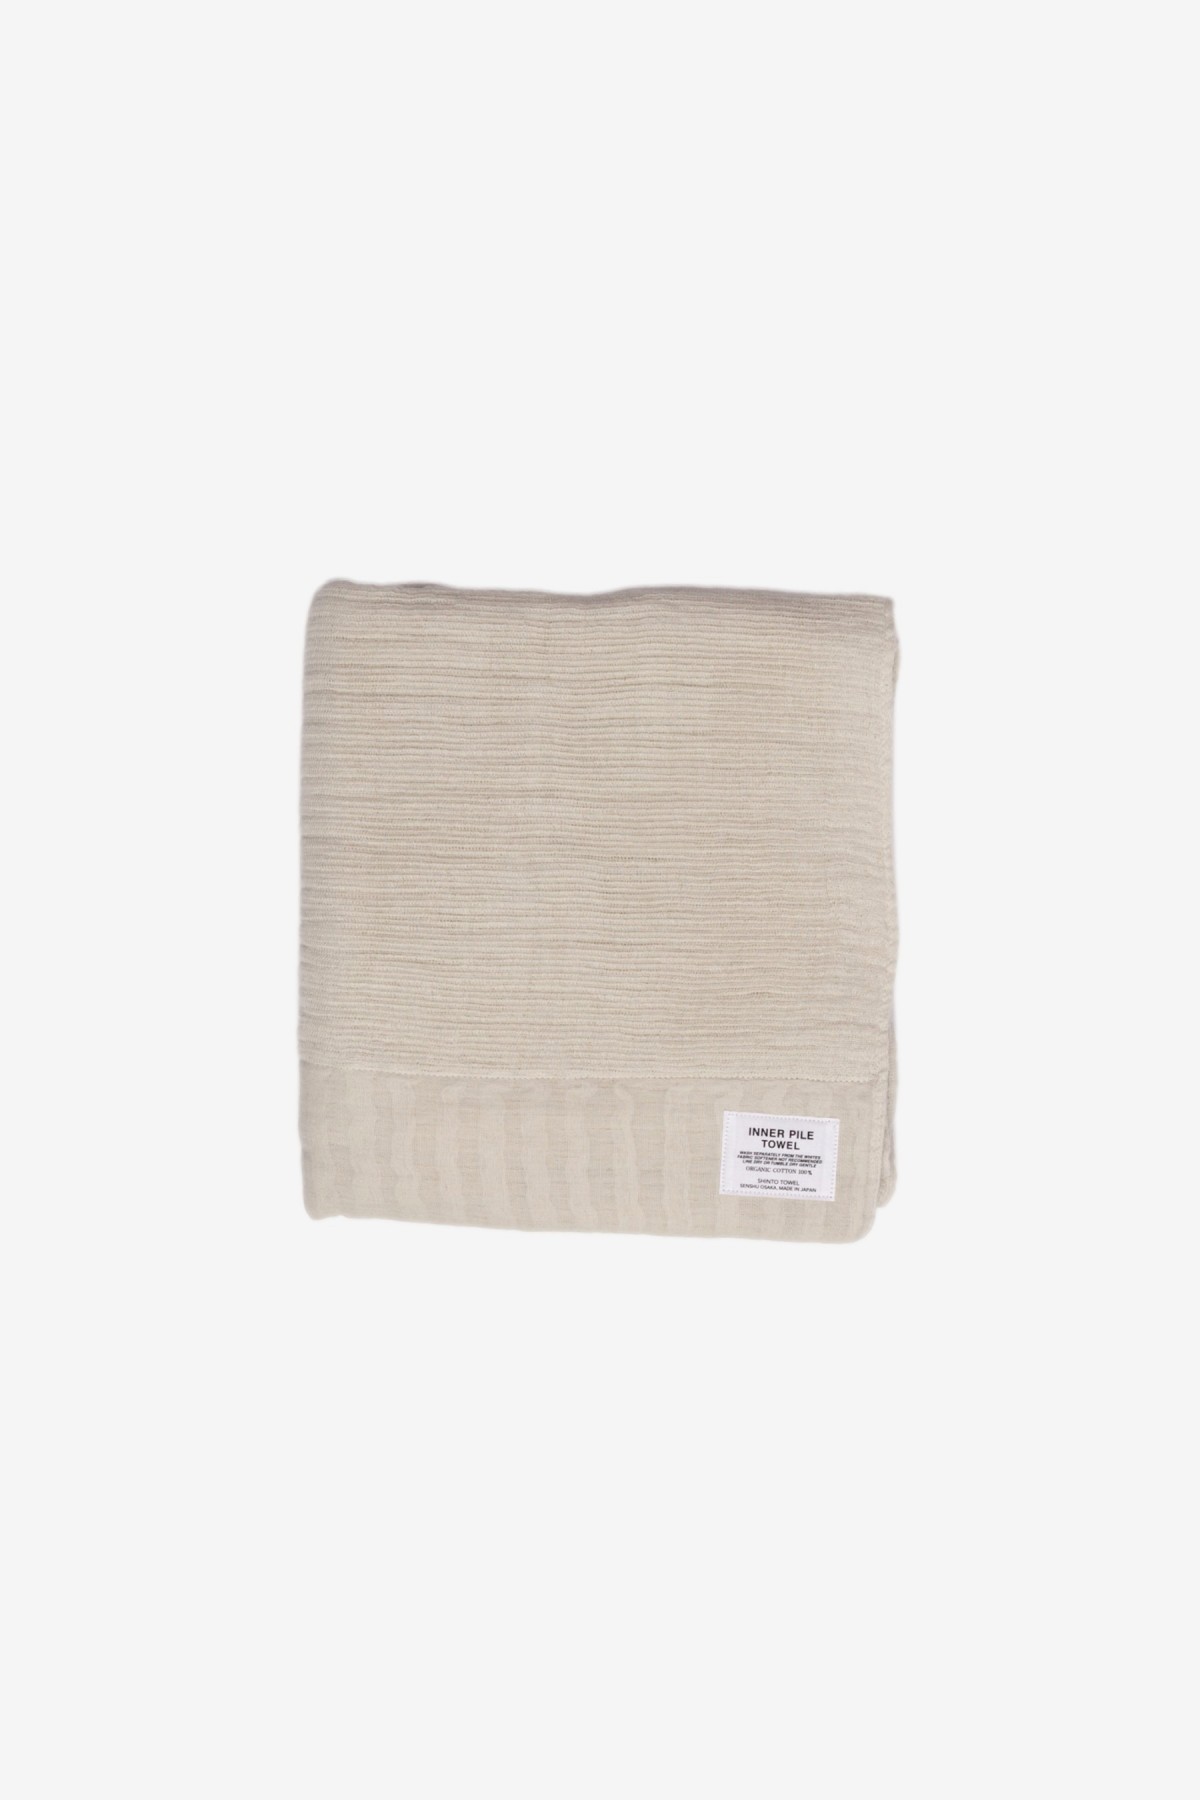 Shinto Inner Pile Bath Towel in Ivory